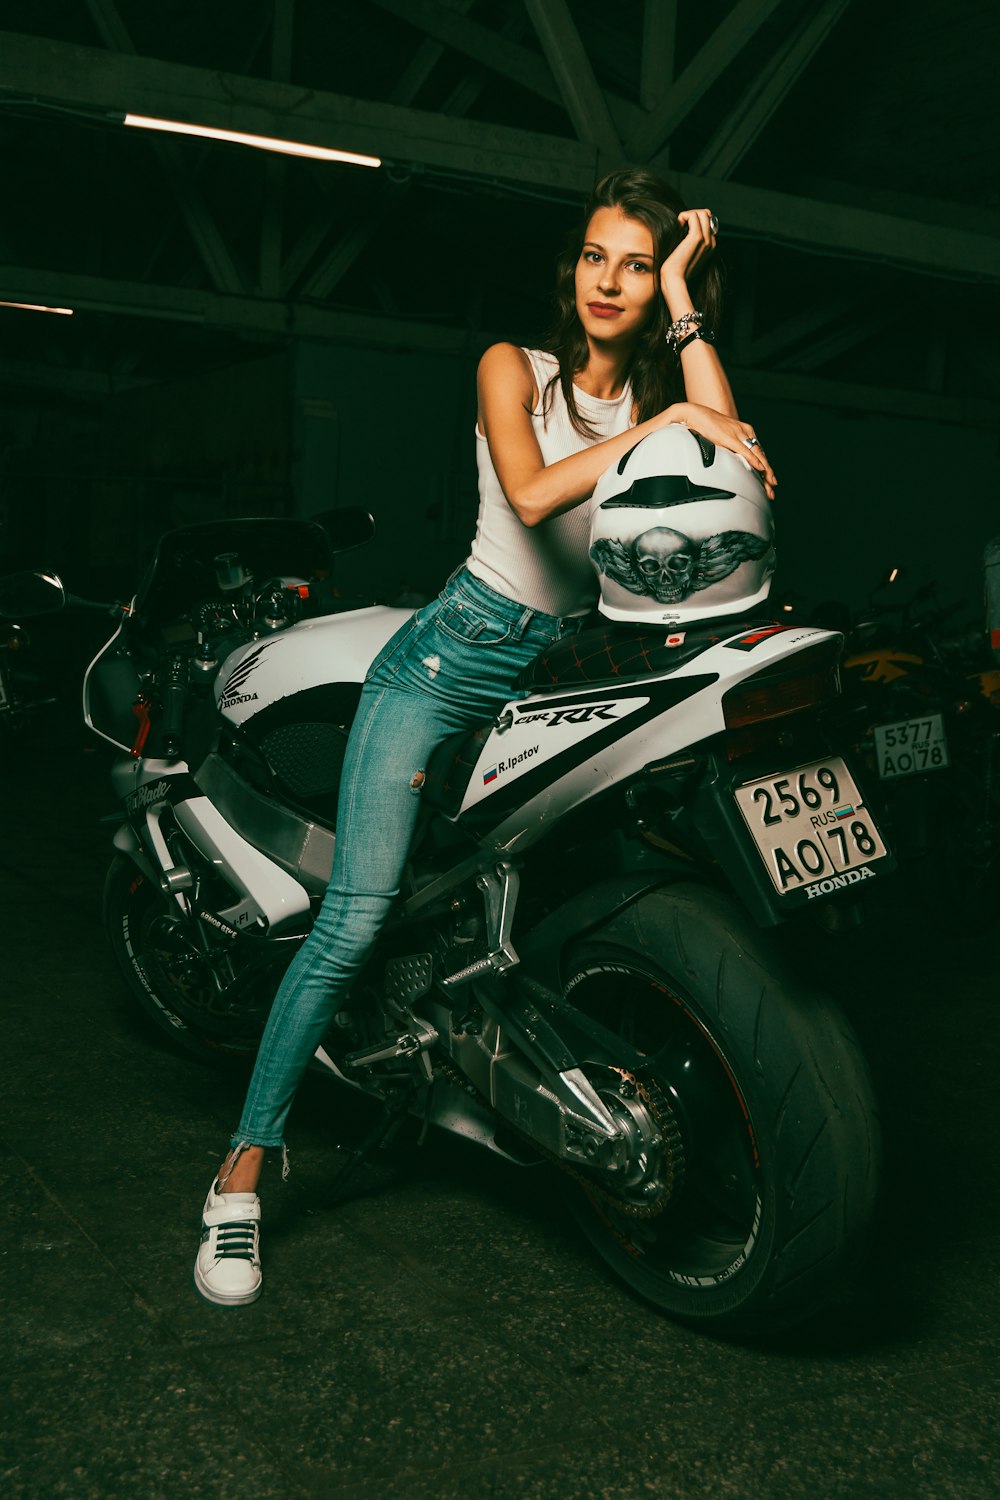 a woman sitting on a motorcycle